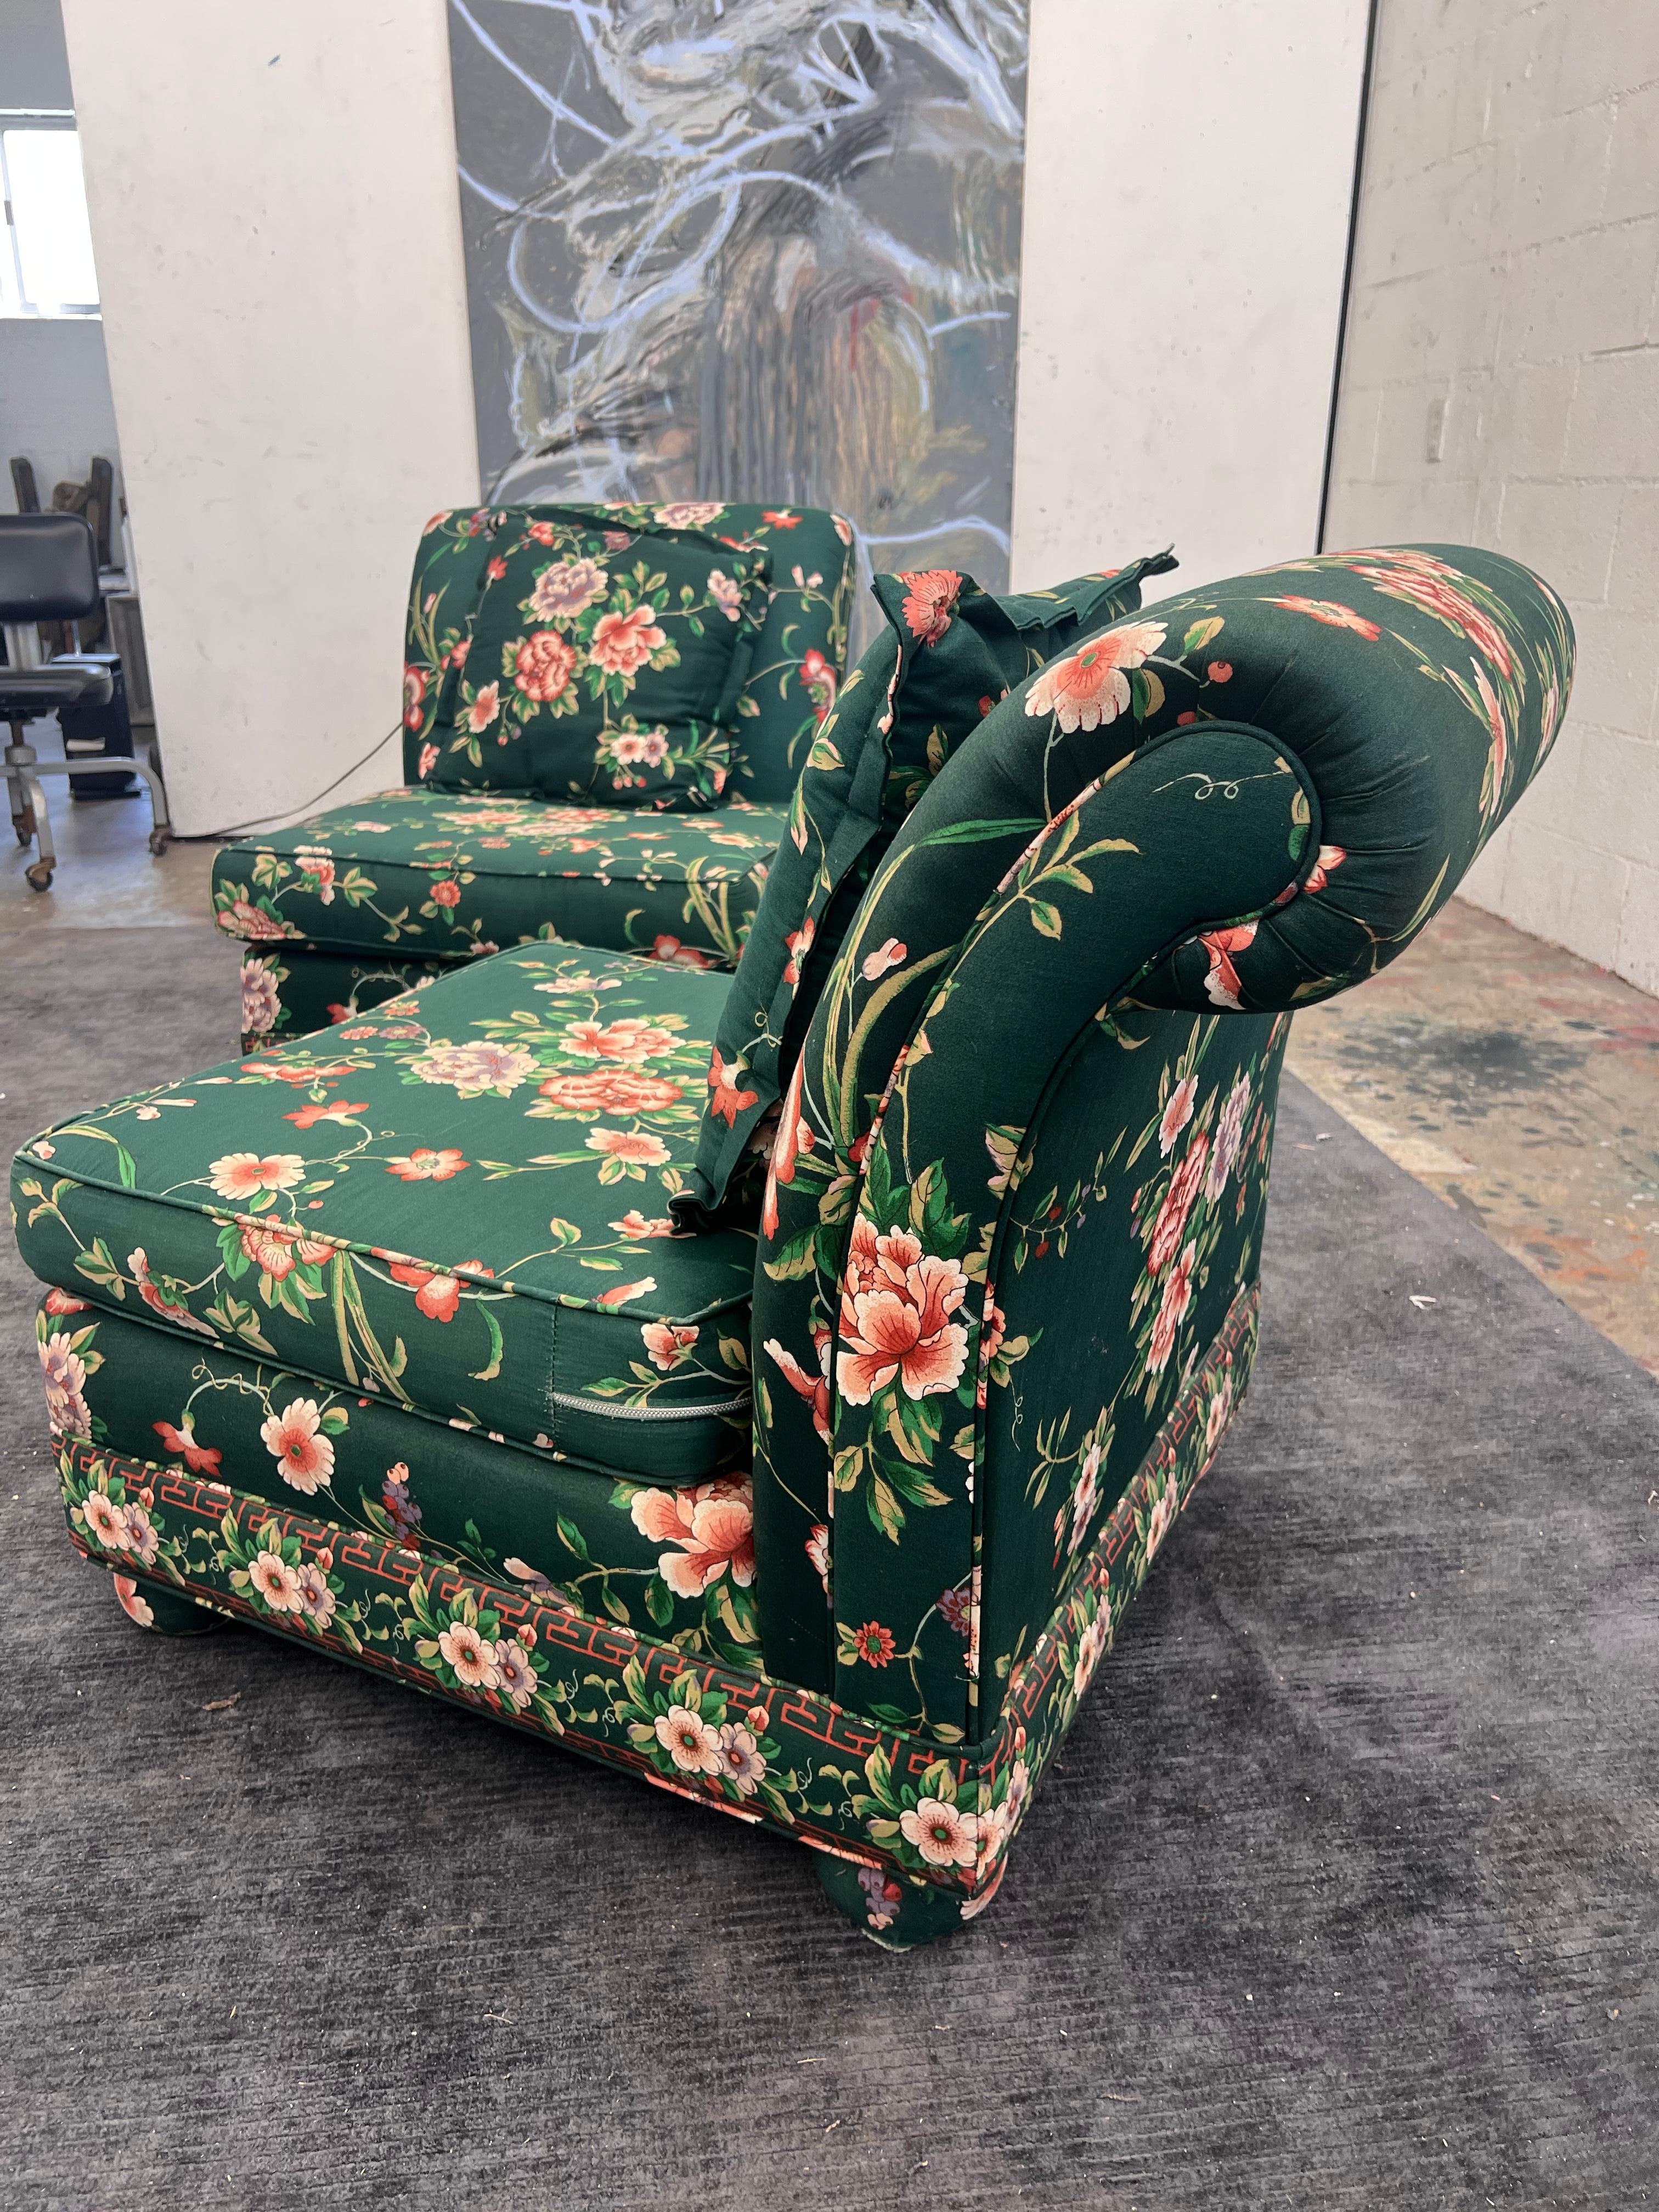 Custom made slipper chairs built for the iconic Bullock’s department store c. 1980s. 

Subtly arched back 
Jewel tone colors  
Pair of matching pillows
Upholstered bun feet 
Heavy and sturdy built 


Floral motif on Hunter green background, the